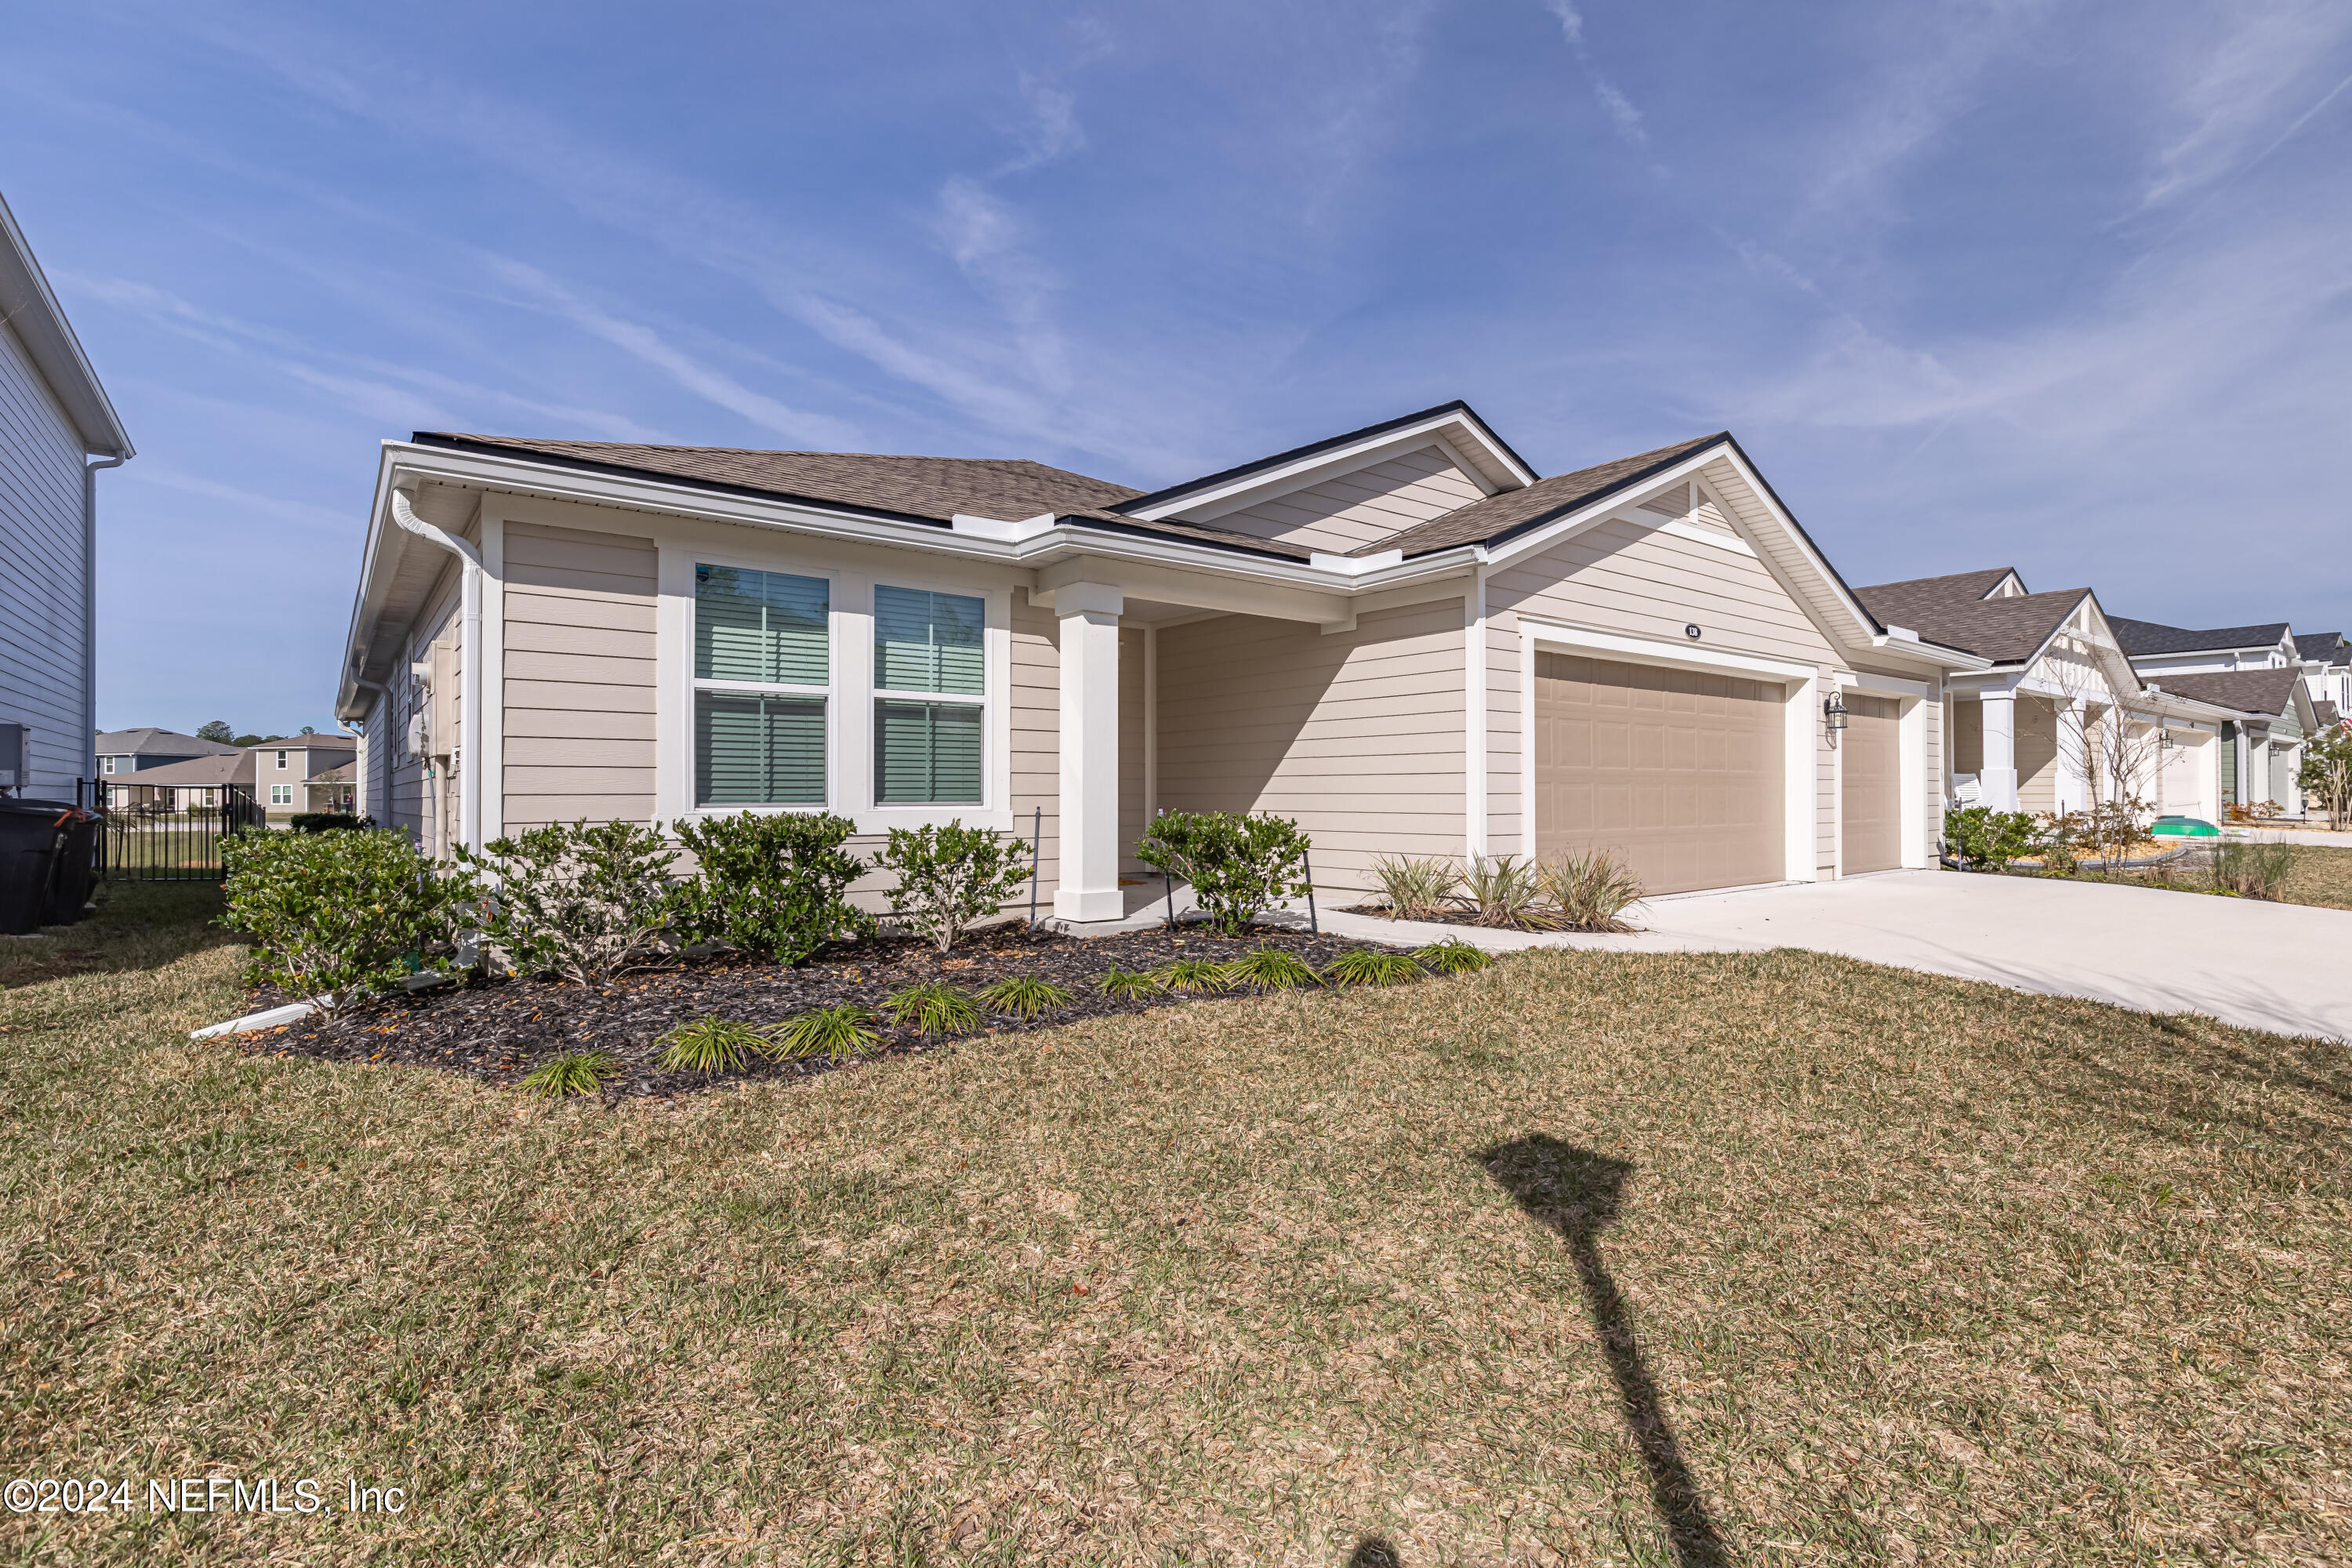 St Johns, FL home for sale located at 138 Riva Ridge Place, St Johns, FL 32259